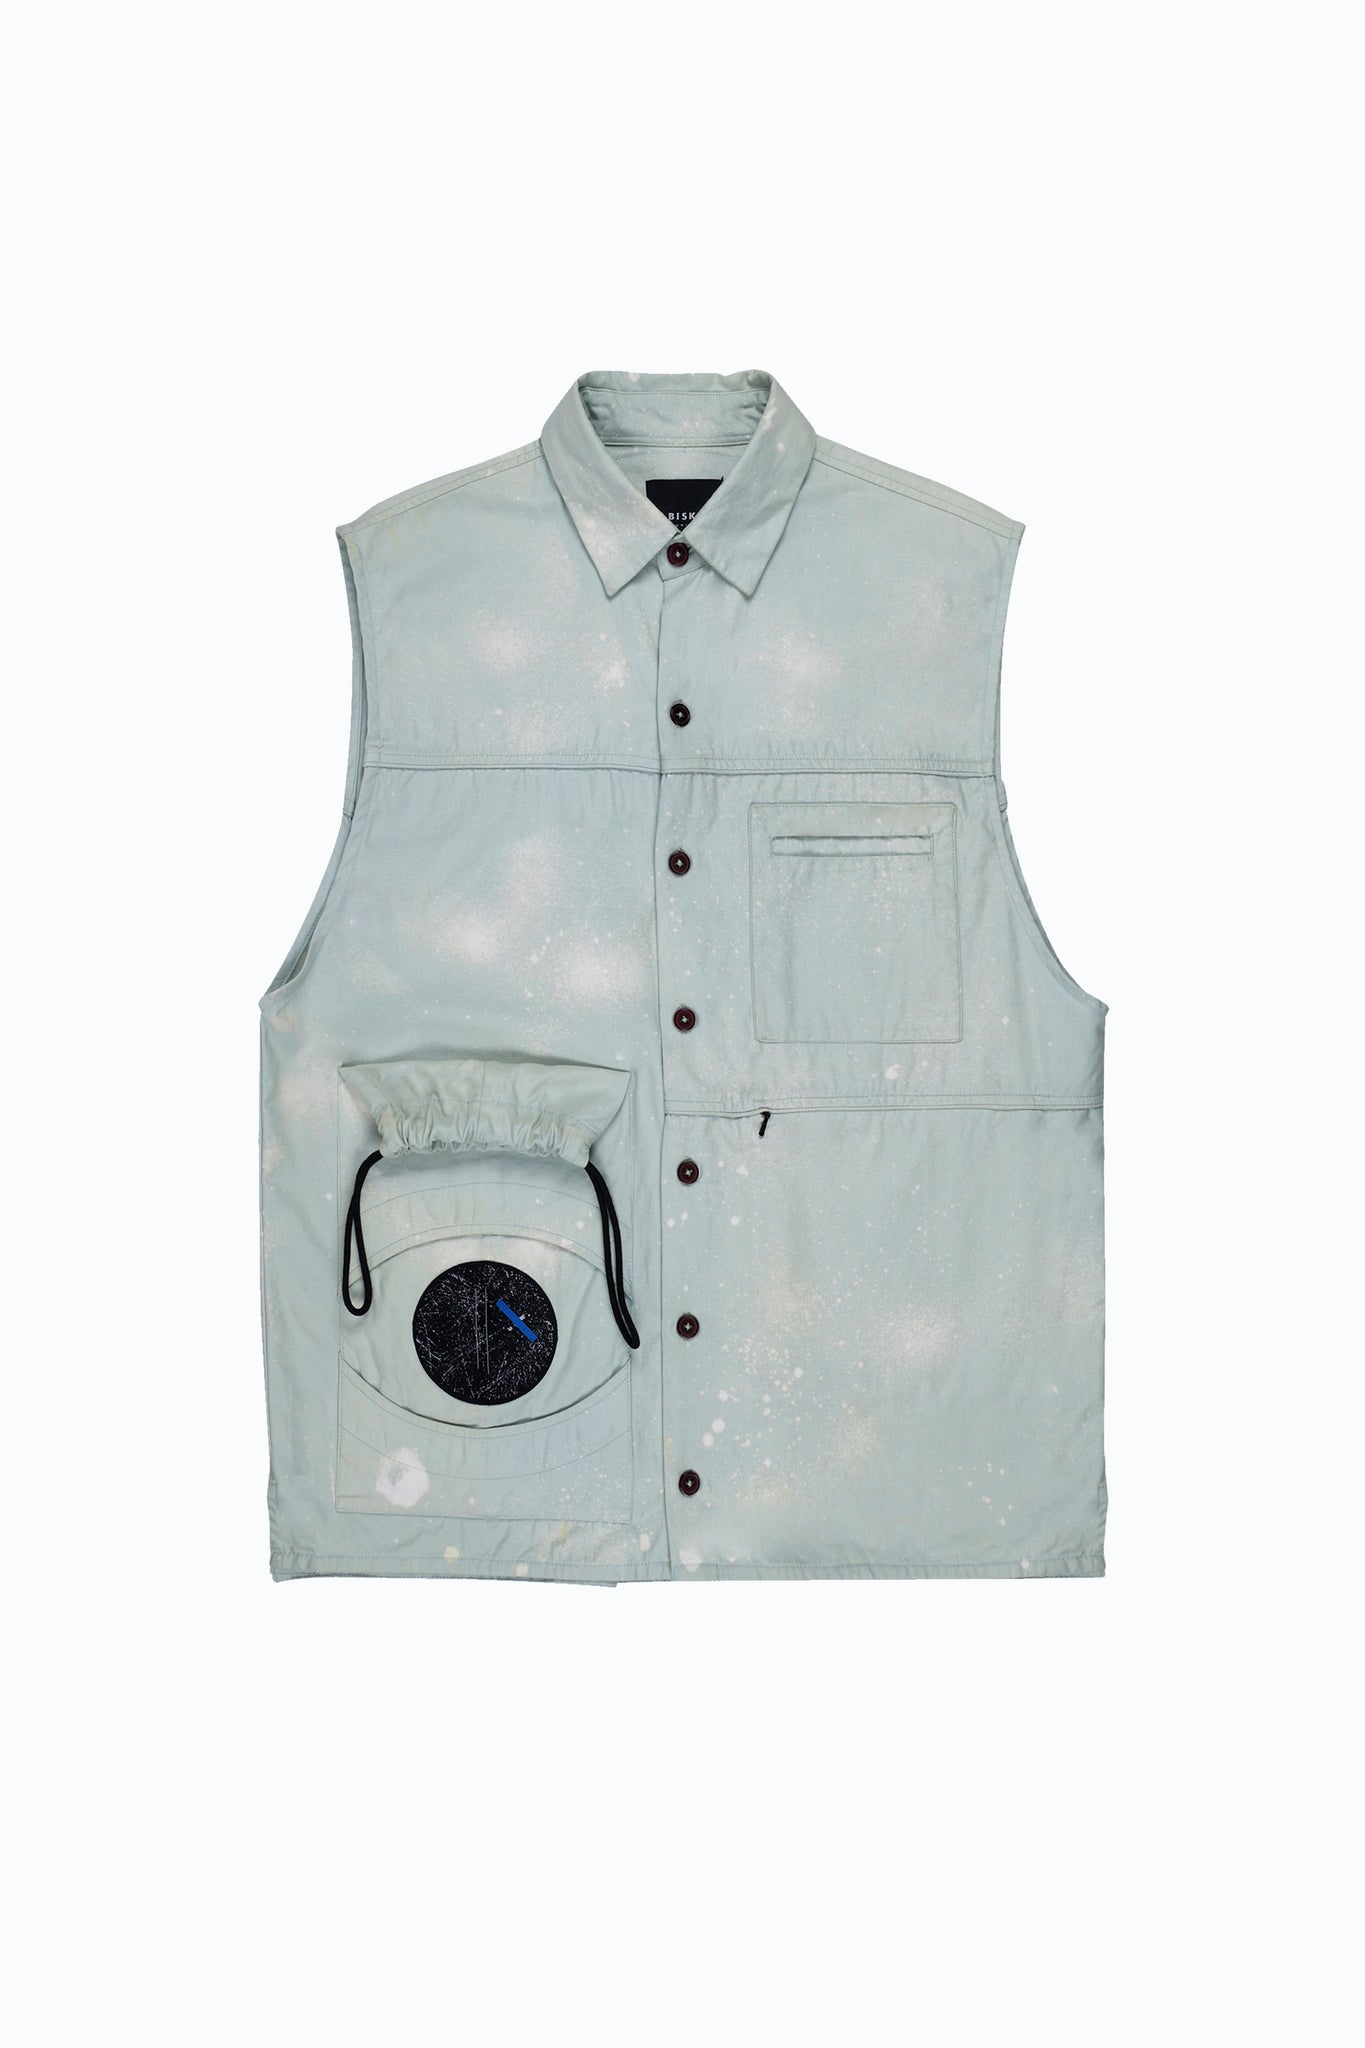 Orbit-Green Vest with Circular Space Patch